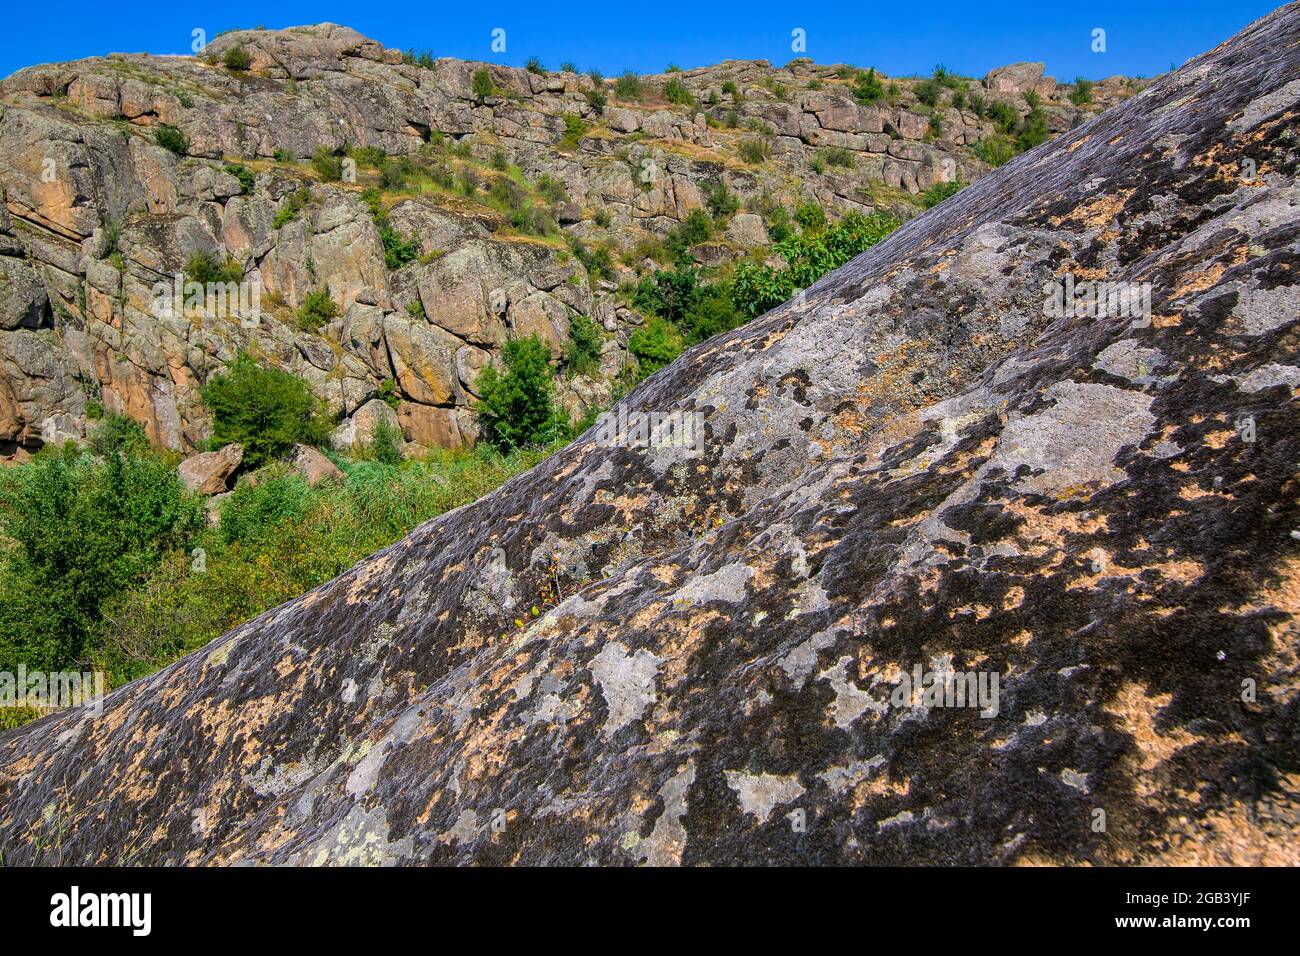 boulders overgrown with moss in a canyon with rocks and green plants on top illuminated by sunlight against a blue sky, nobody. Stock Photo